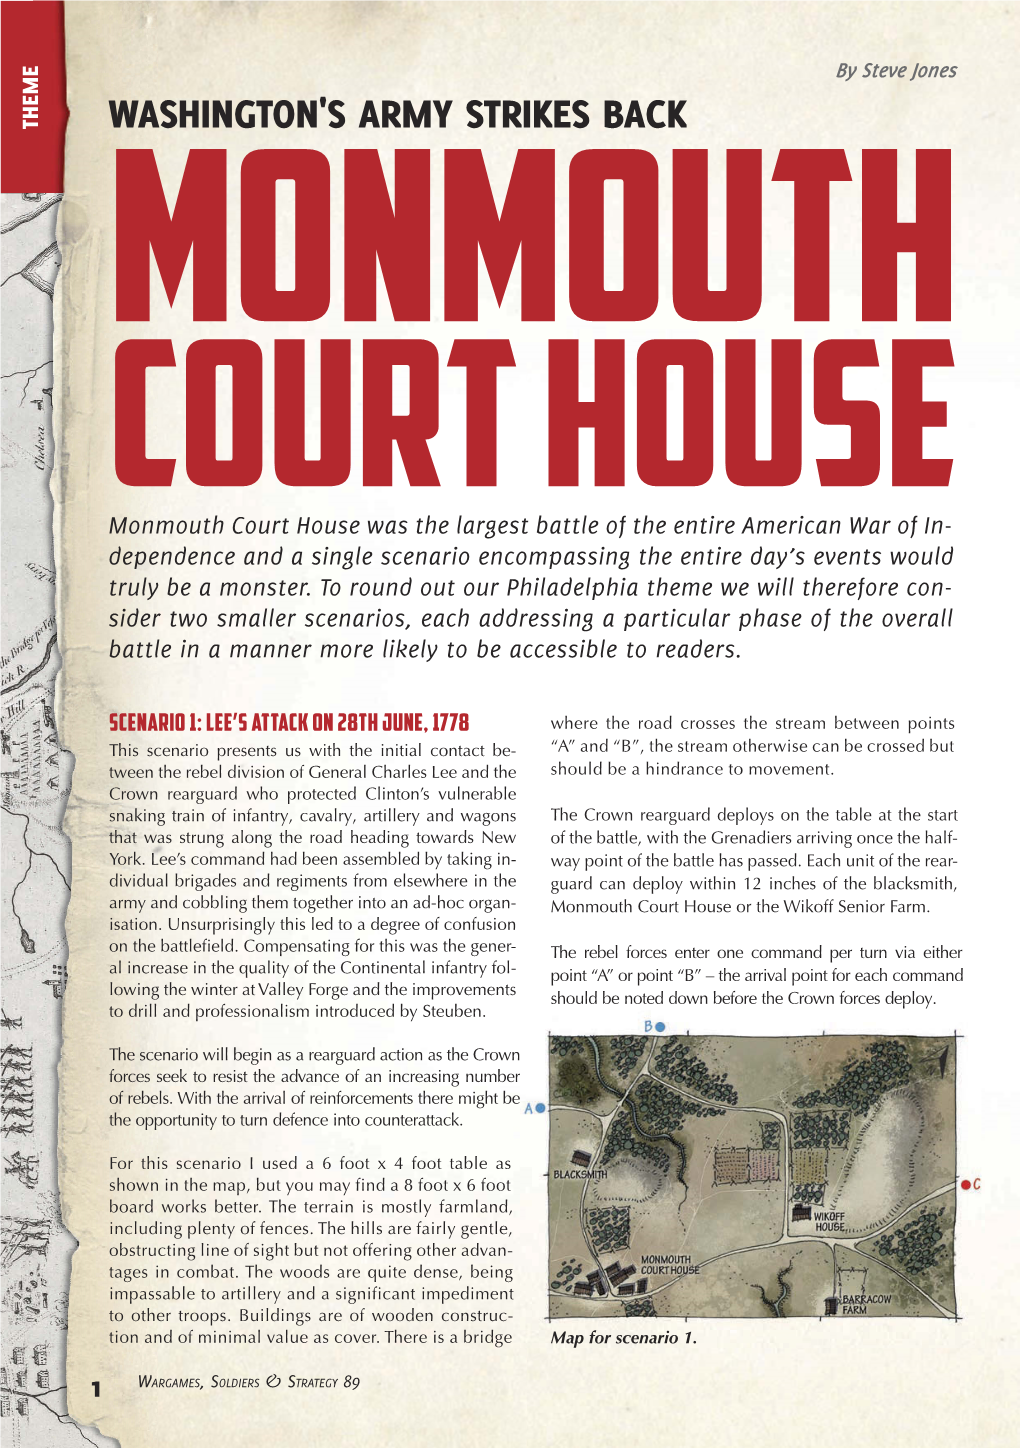 Download the Monmouth Courthouse Scenario